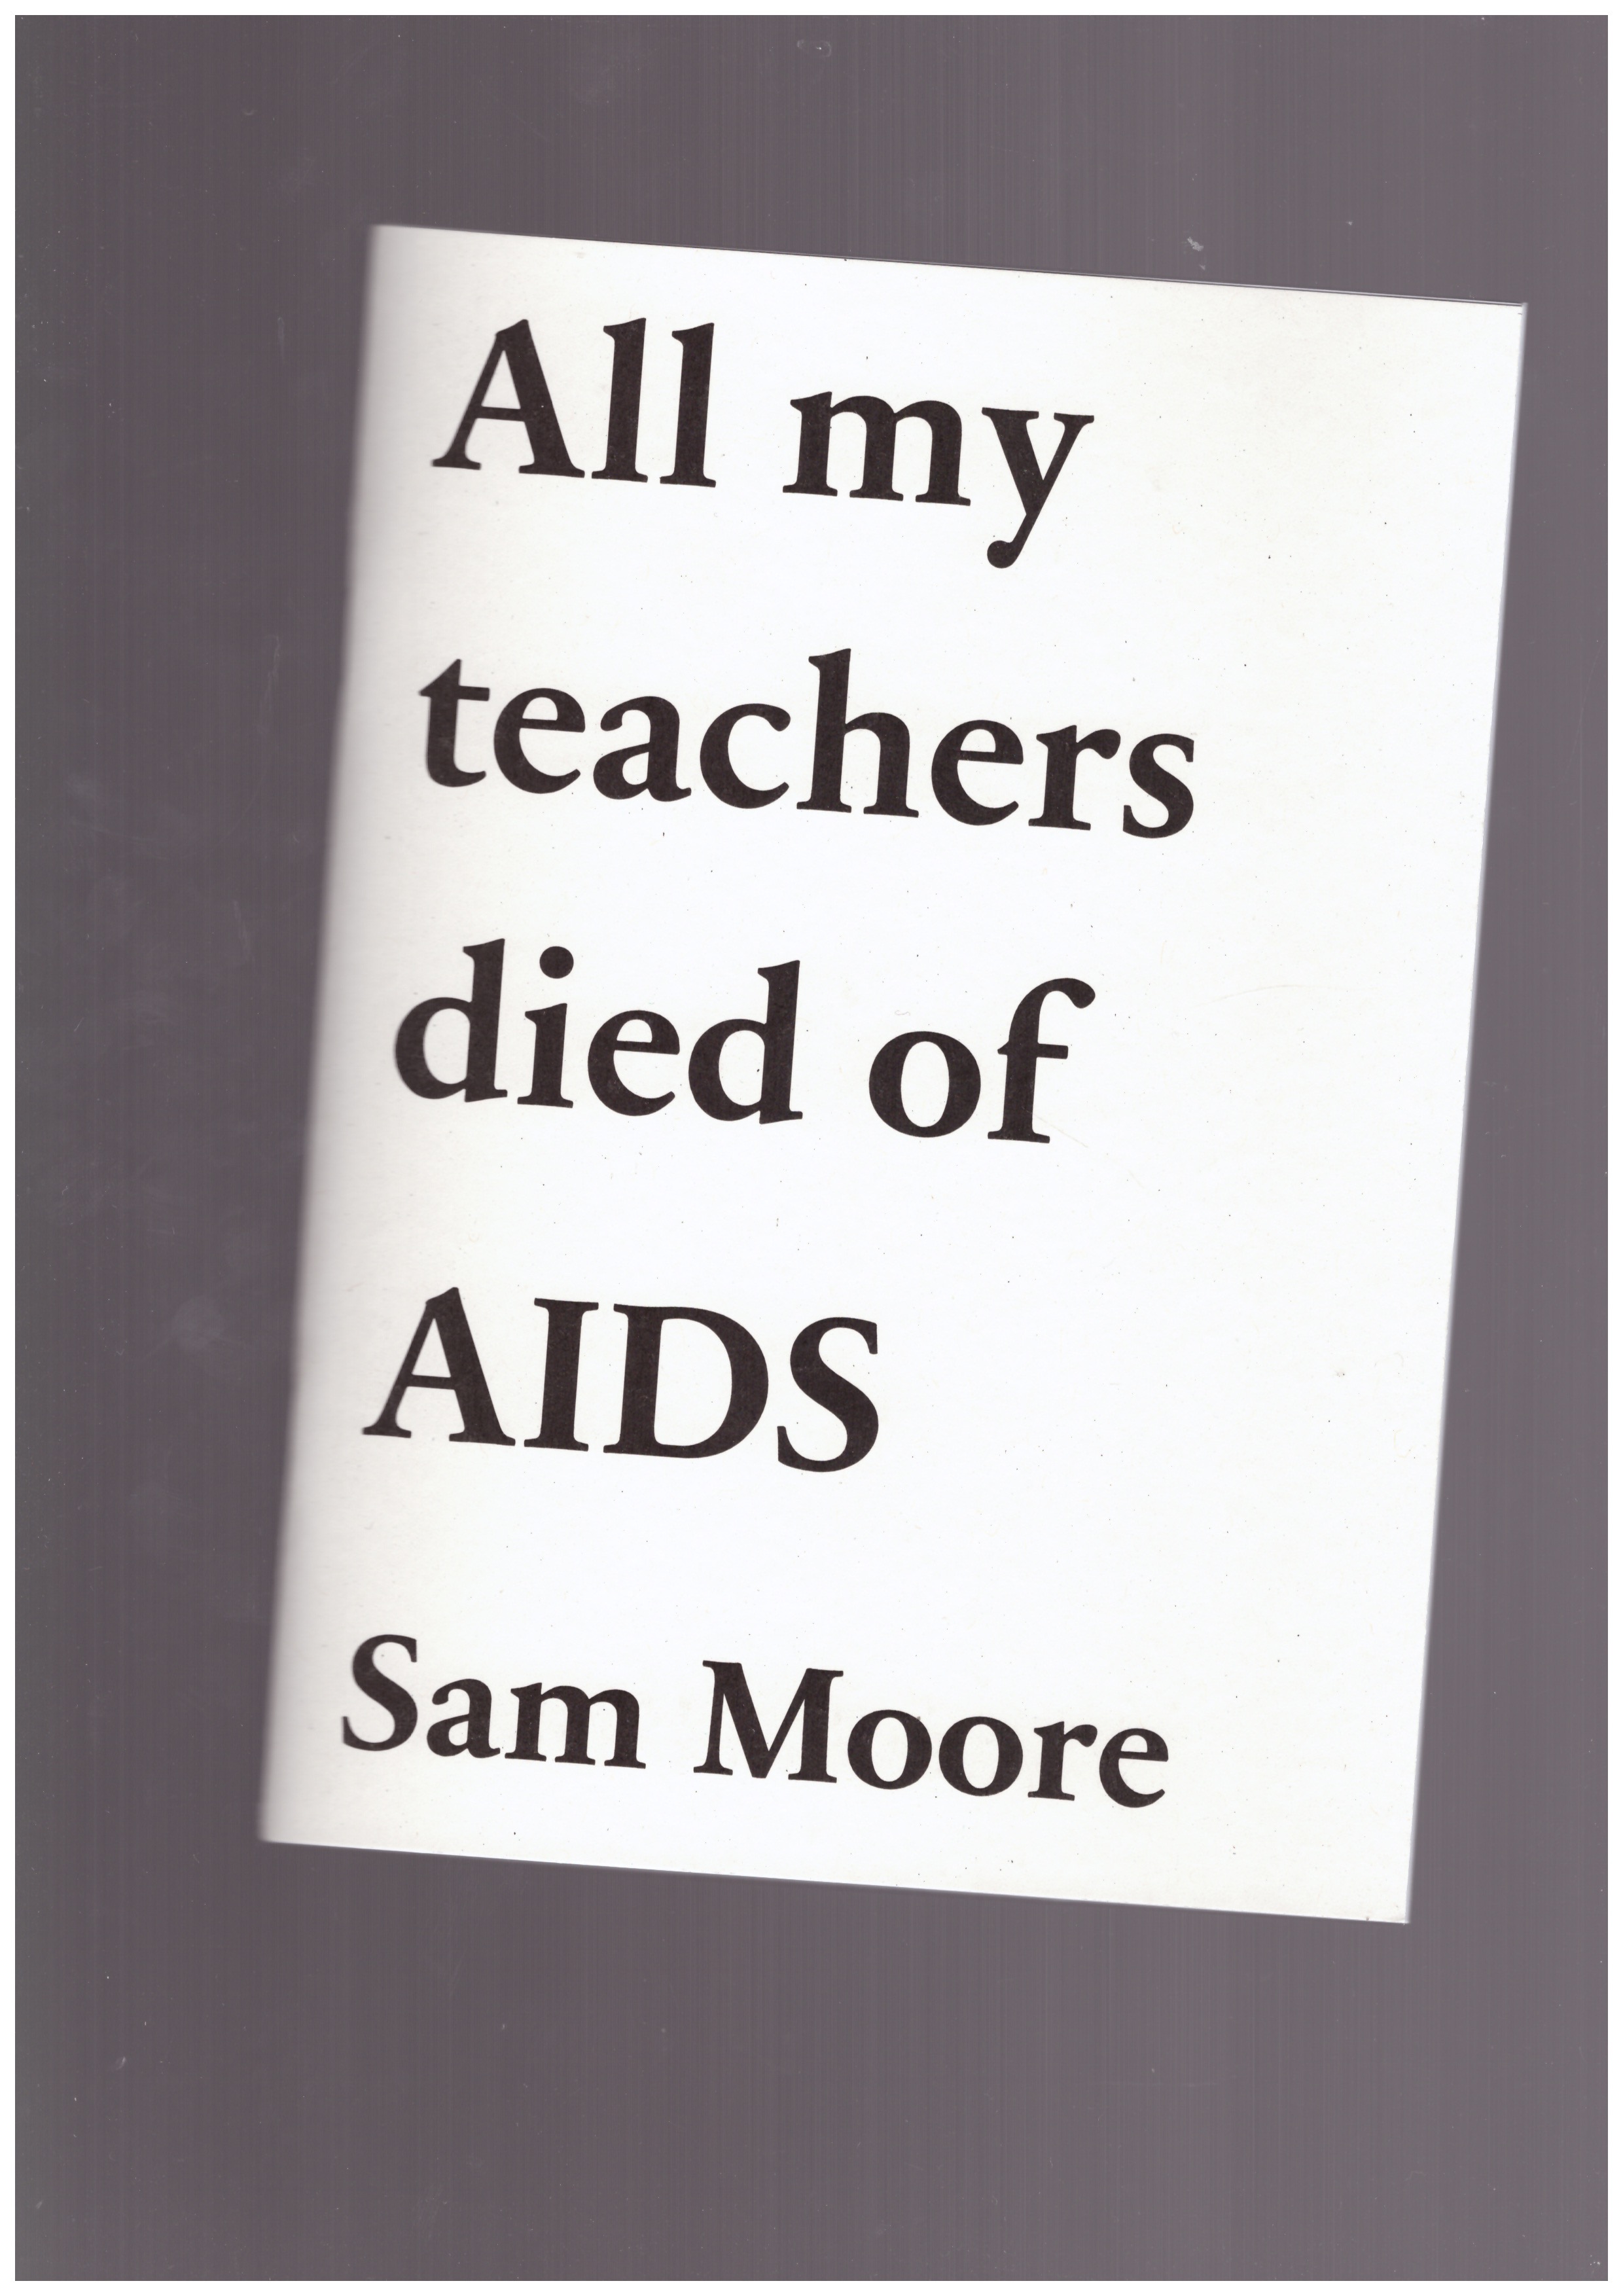 MOORE, Sam - All my teachers died of AIDS